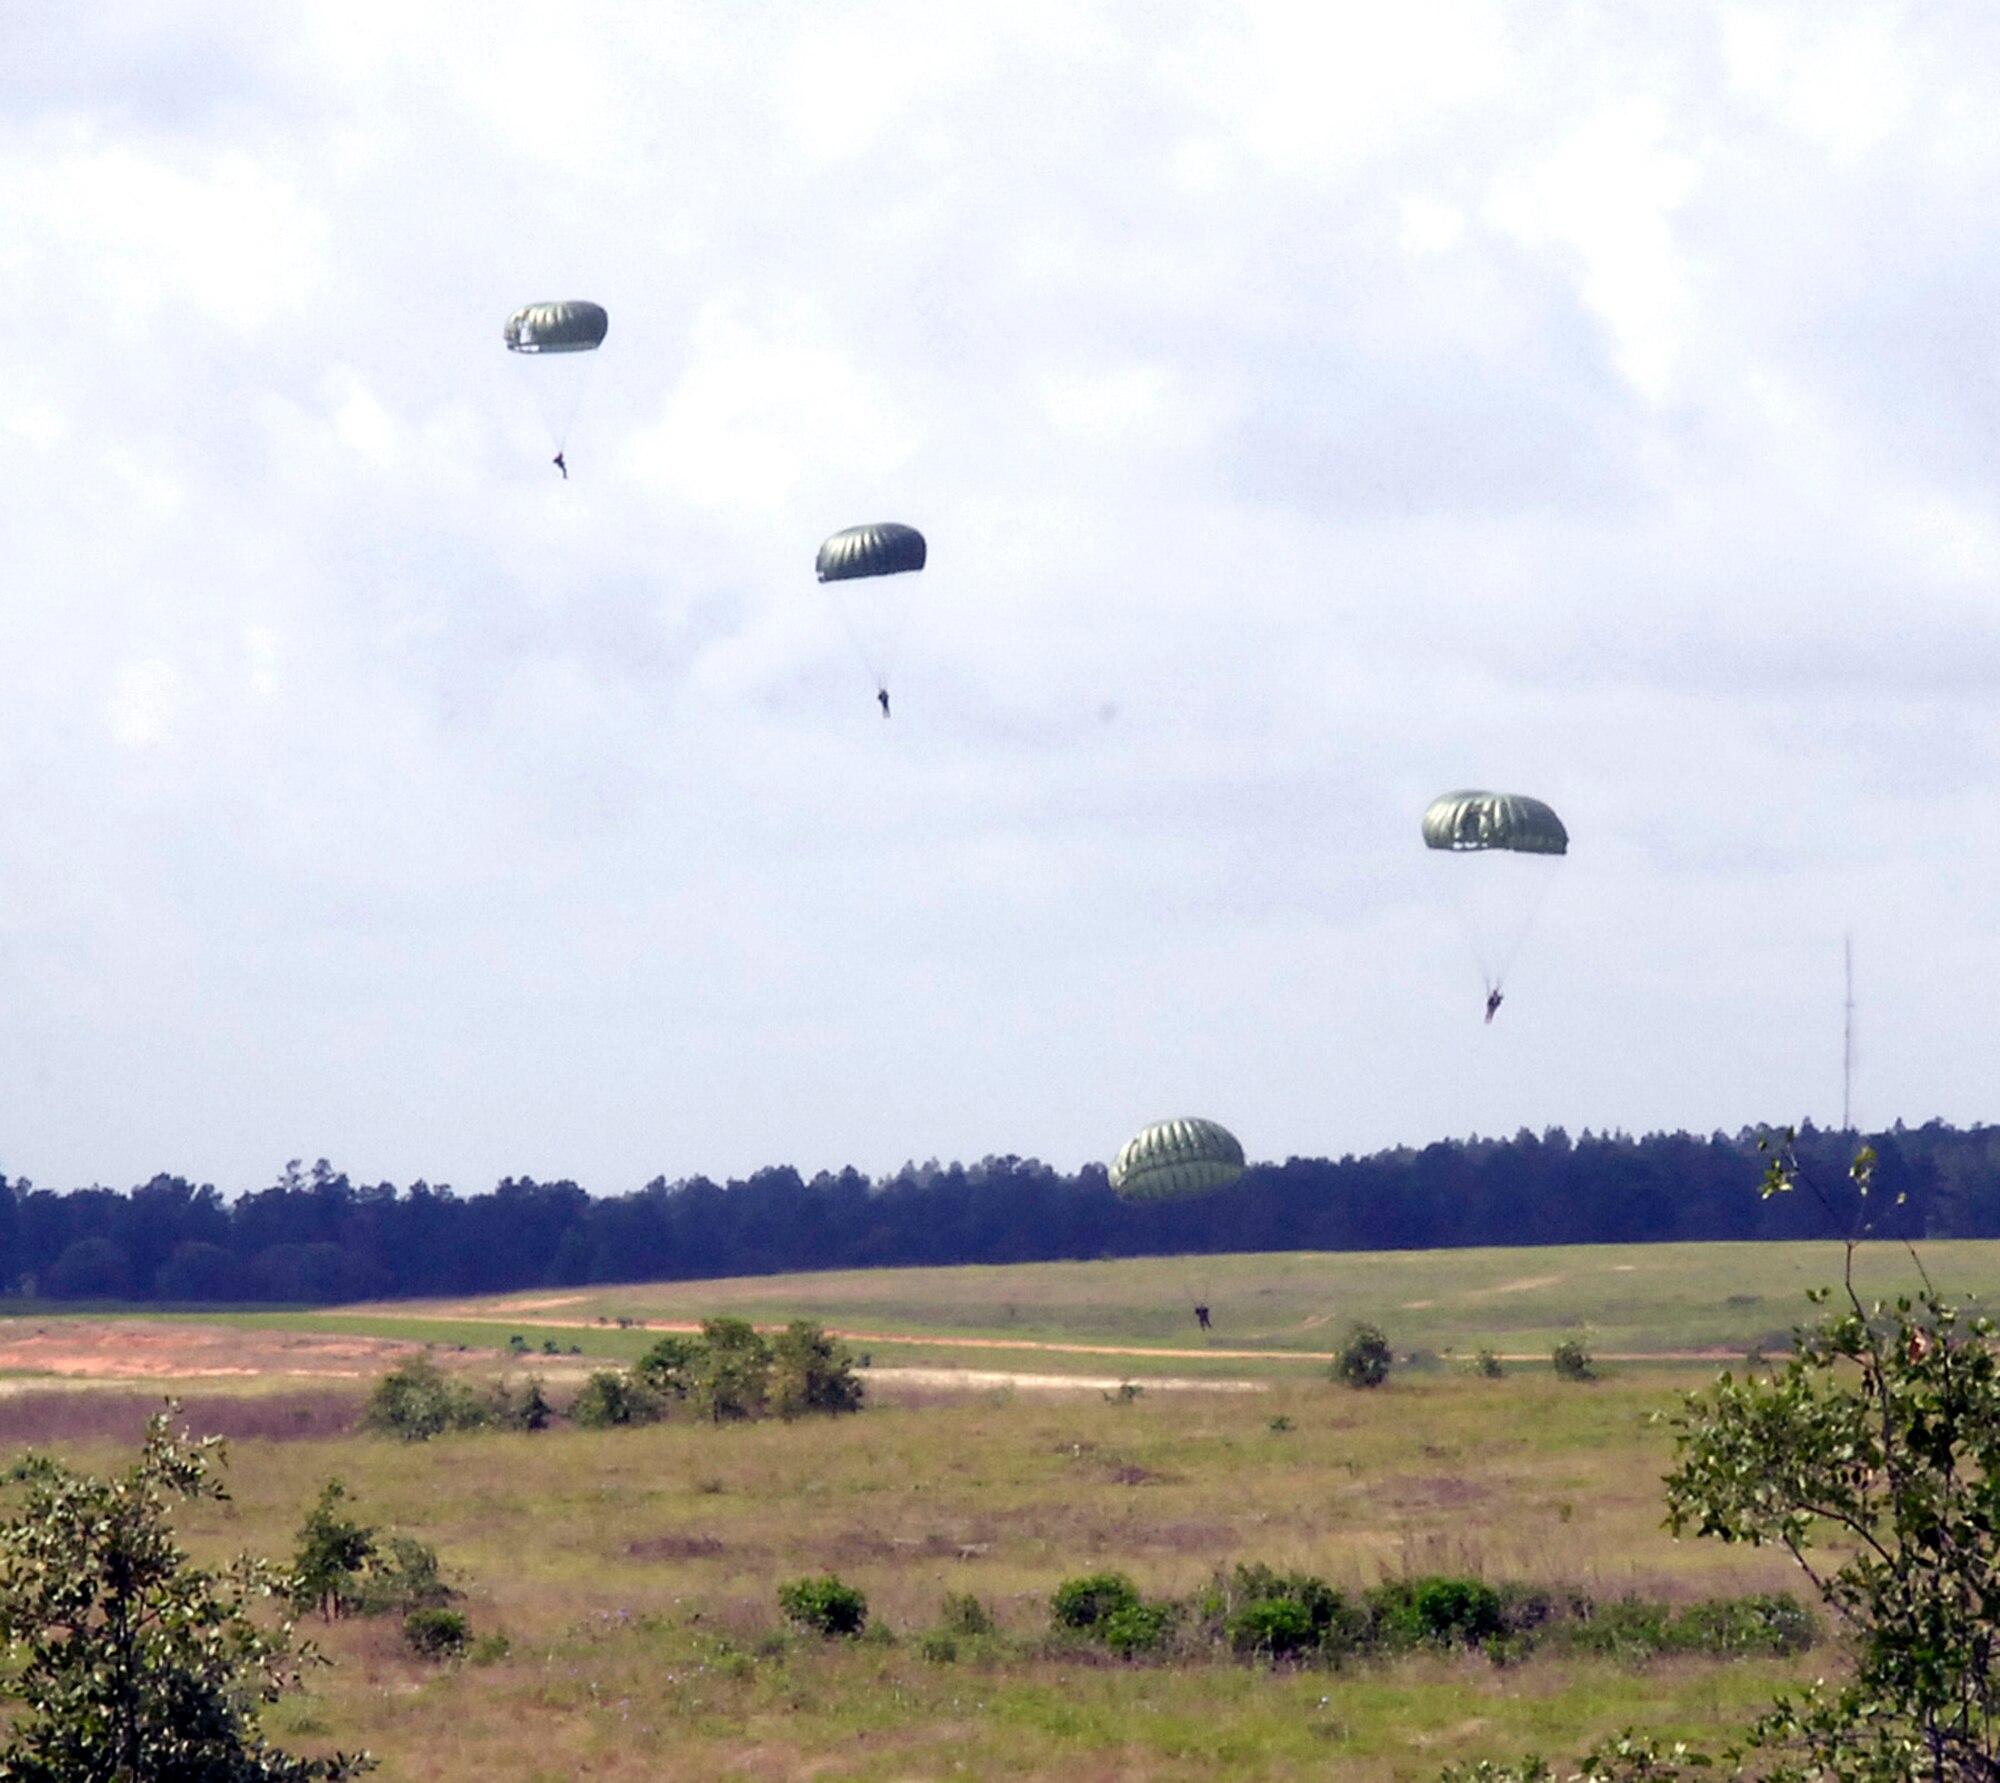 Special operations Soldiers prepare to land during static-line parachute training at the Joint Readiness Training Center at Fort Polk, La., on Wednesday, May 3, 2006. They were joined by an Air Force survival, evasion, resistance and escape specialist. (U.S. Air Force photo/Senior Airman Stephen J. Otero) 
